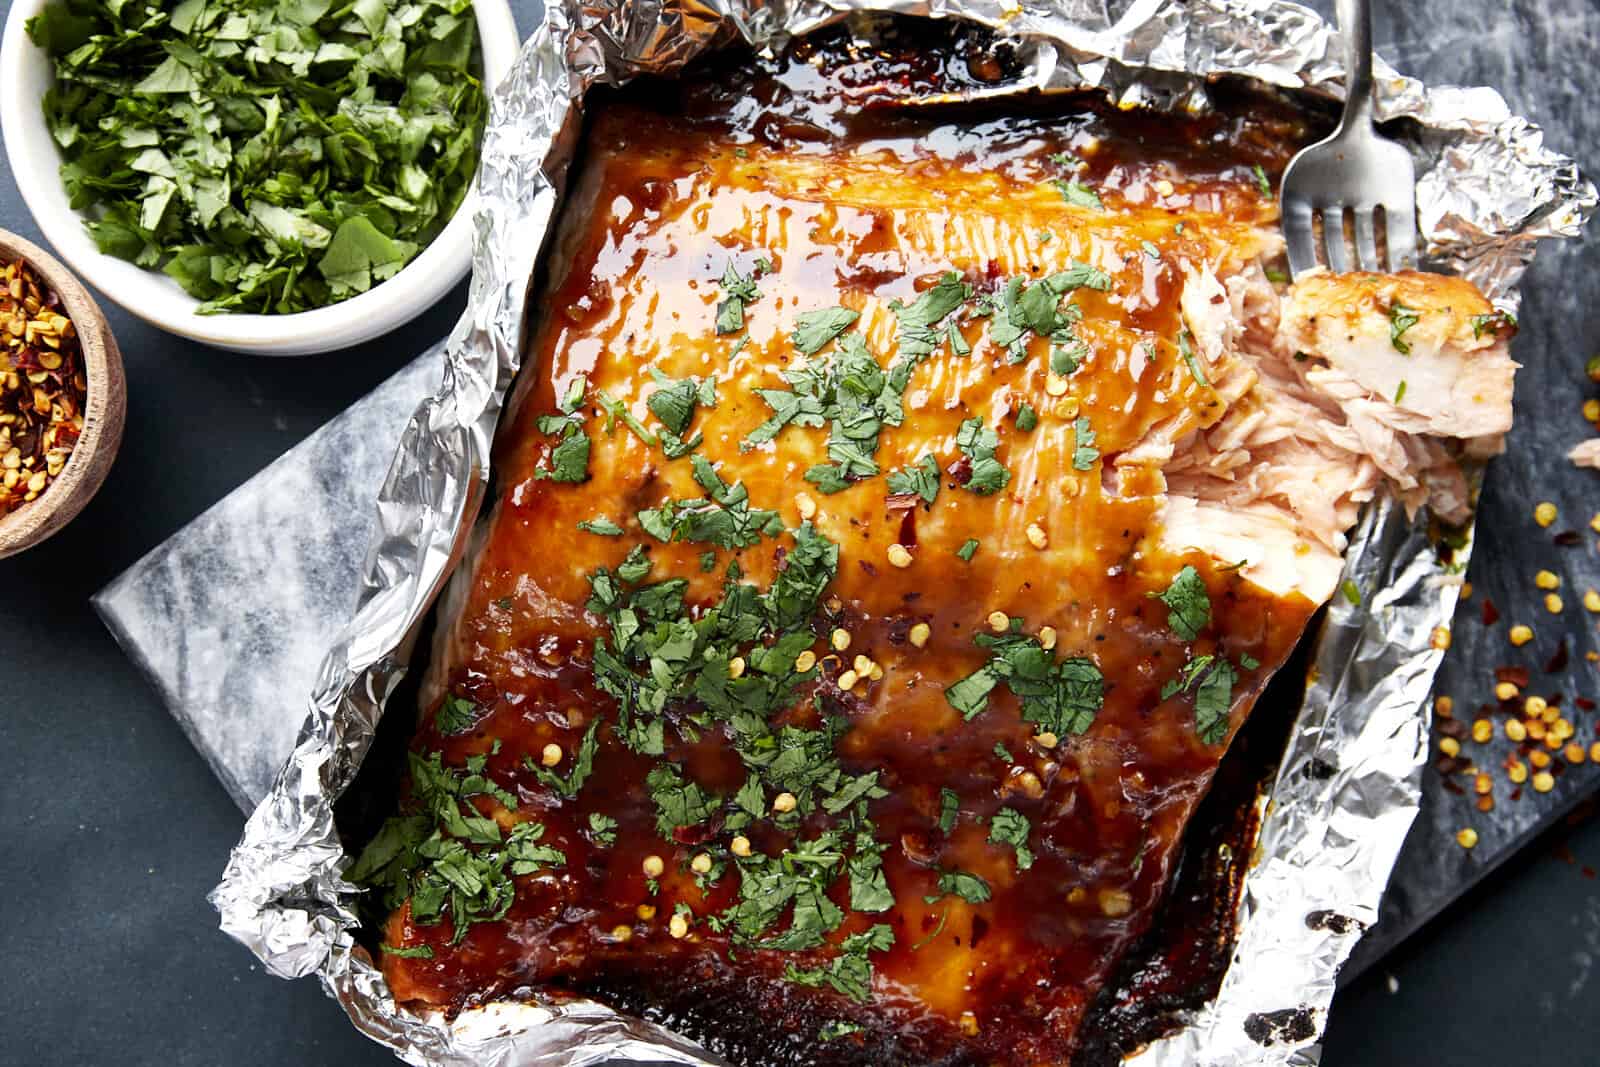 Honey garlic salmon in a foil packet topped with cilantro.